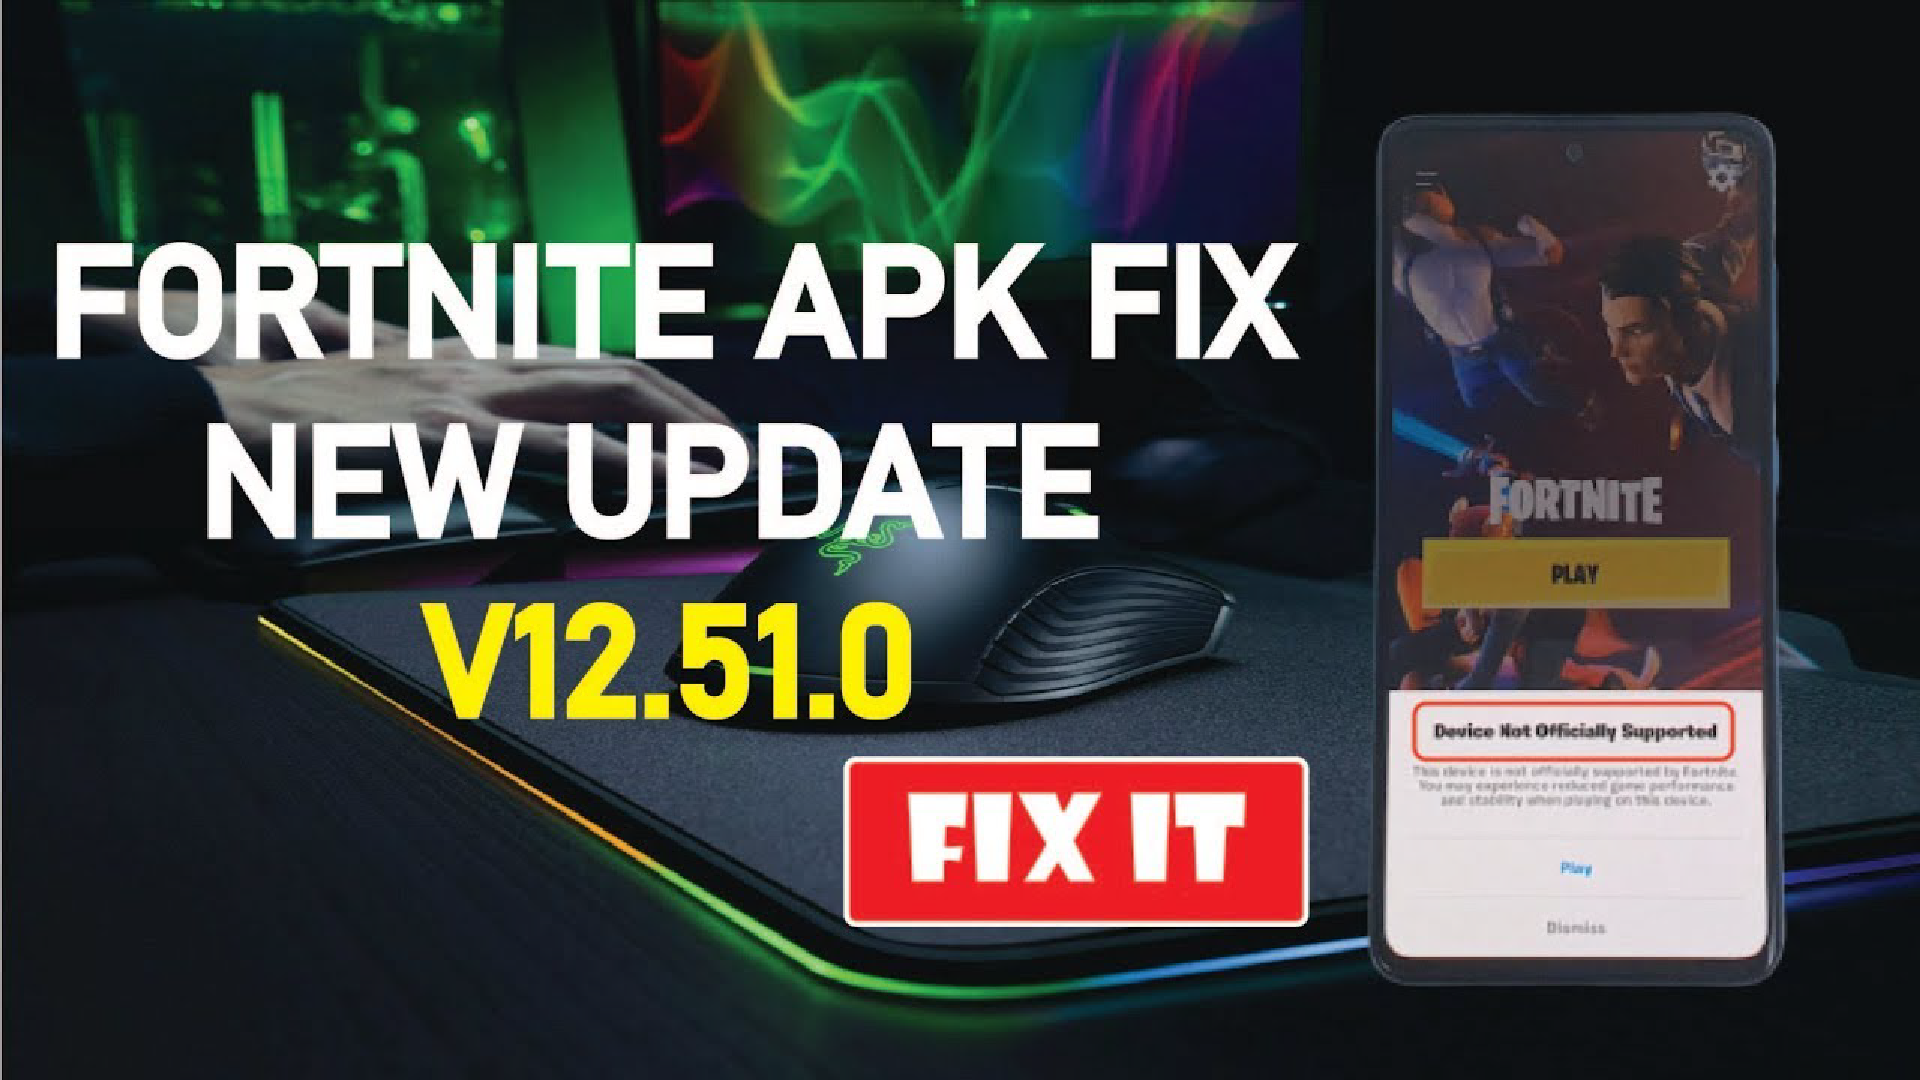 How to install Fortnite Apk Fix Device Not Supported For ... - 1920 x 1080 png 961kB